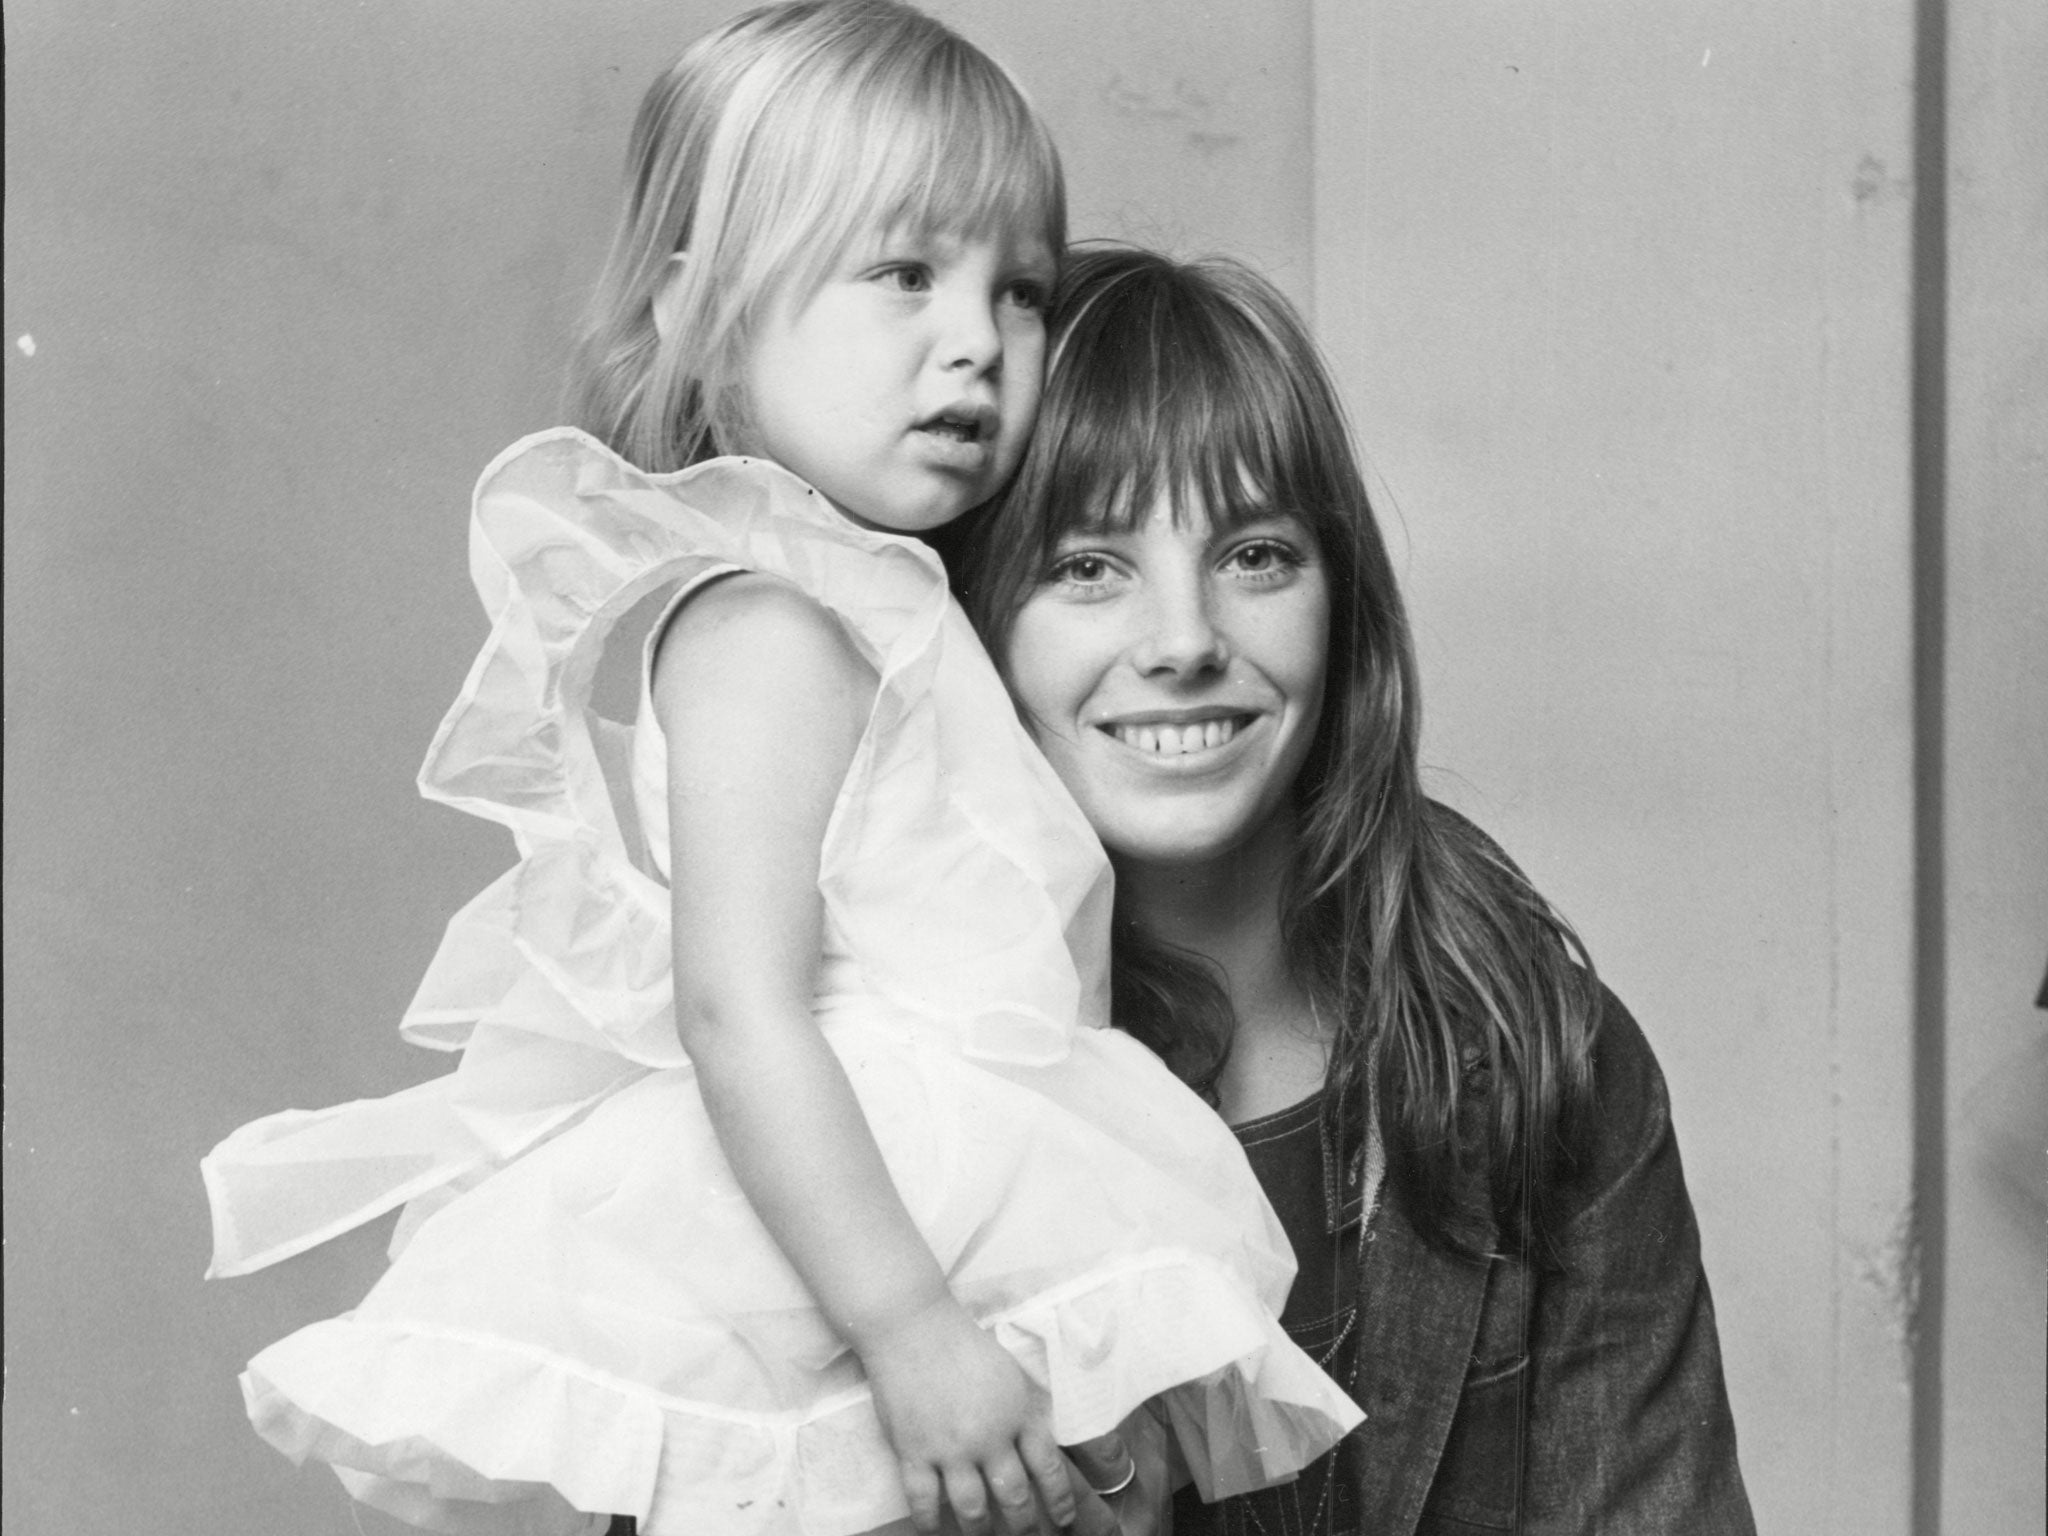 Jane Birkin with her first daughter Kate Barry, which she had with her husband John Barry